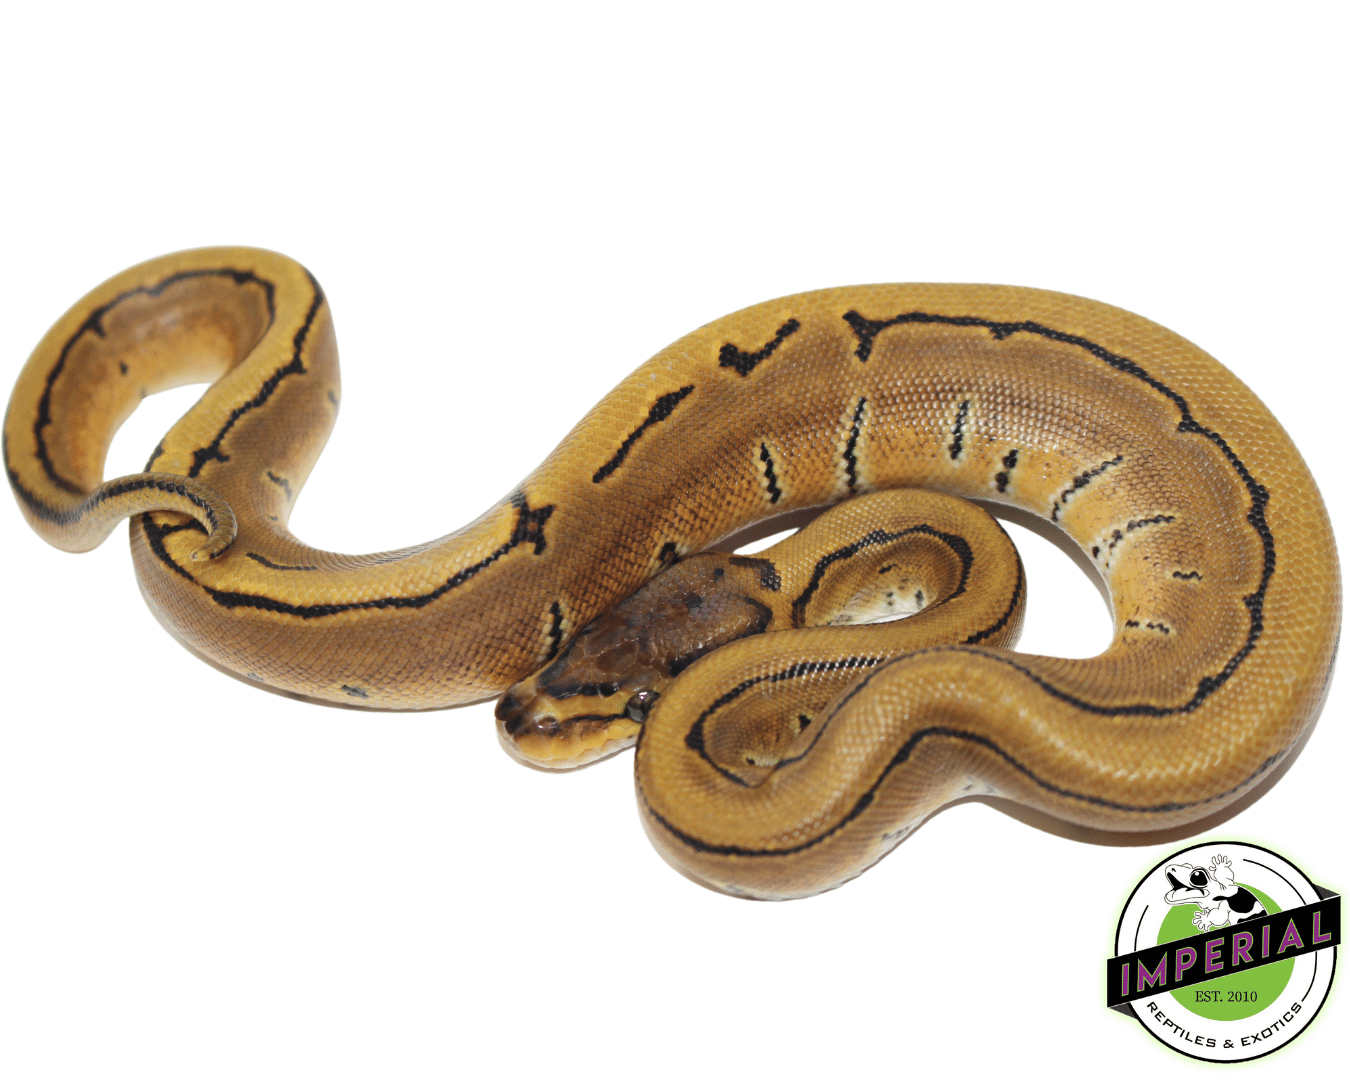 pinstripe ball python for sale online at cheap prices, buy ball pythons near me